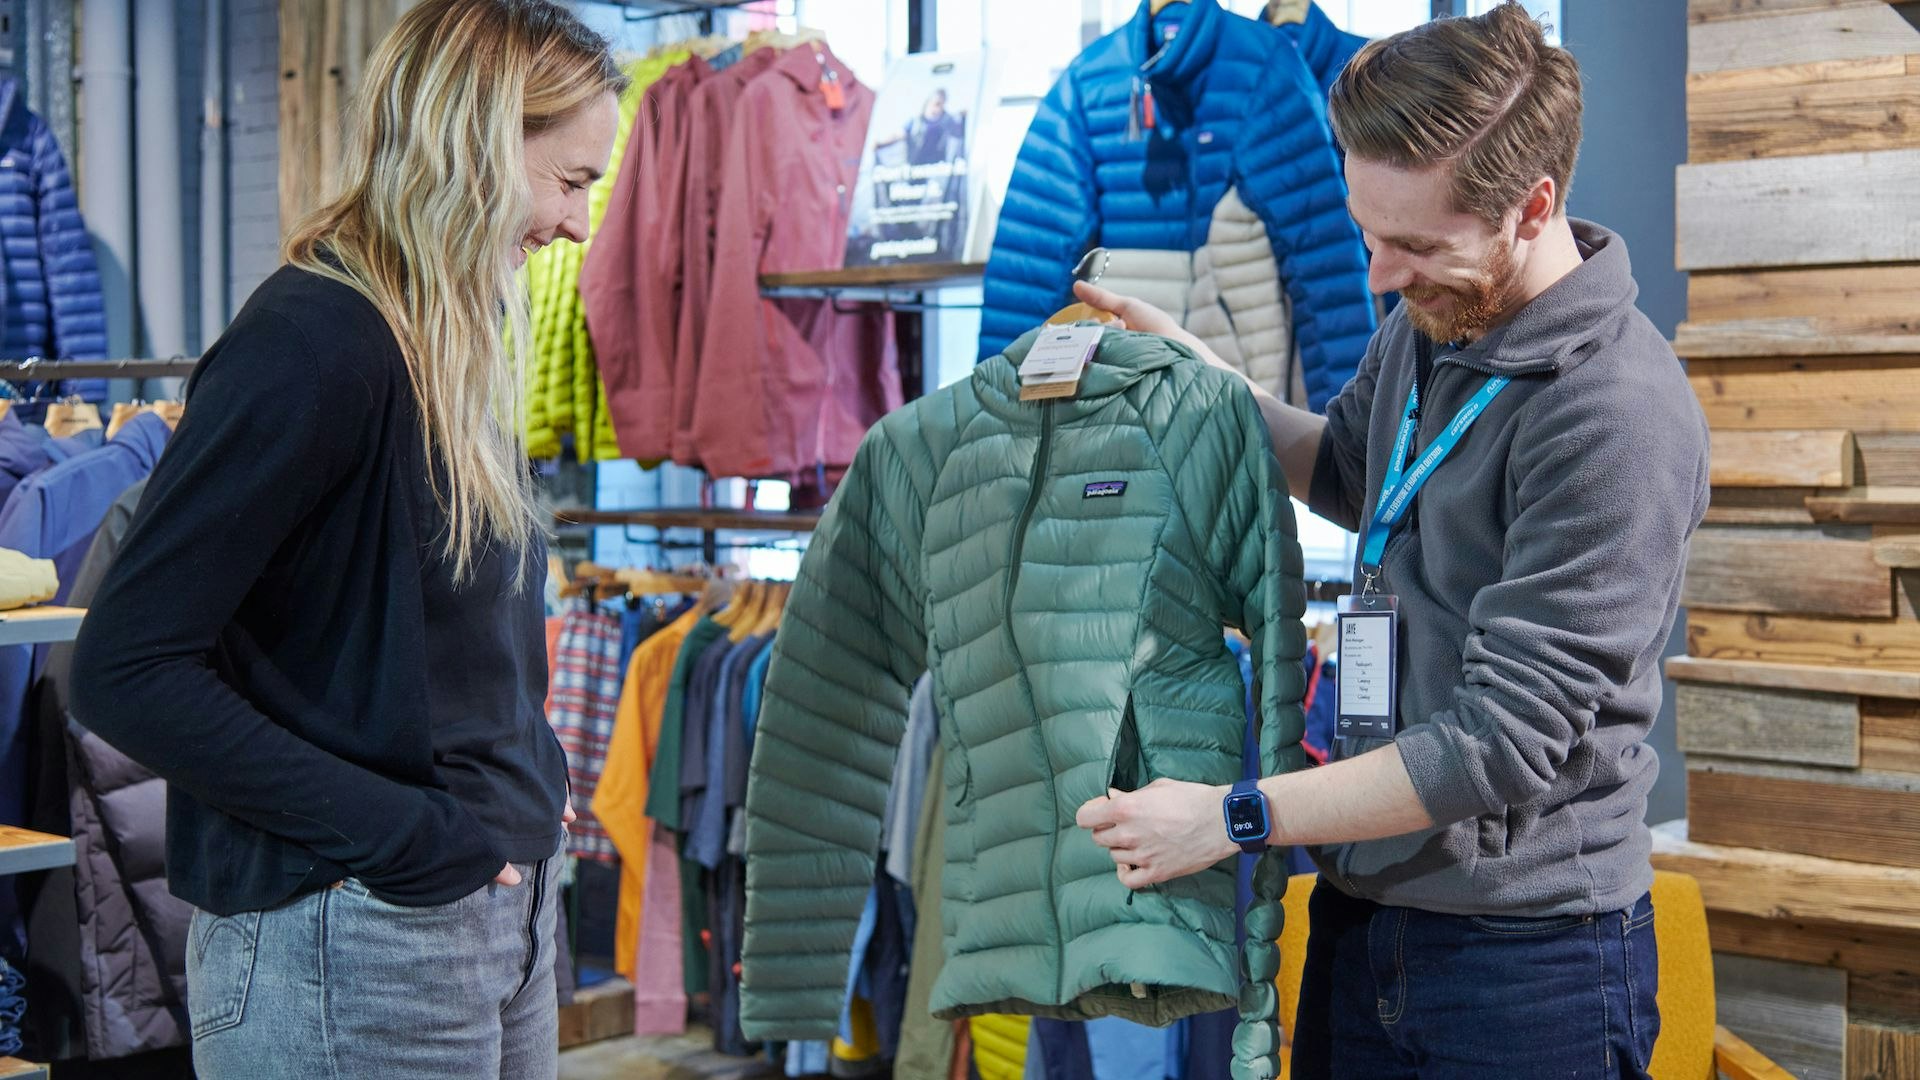 Getting advice on buying a hiking jacket in an outdoor store